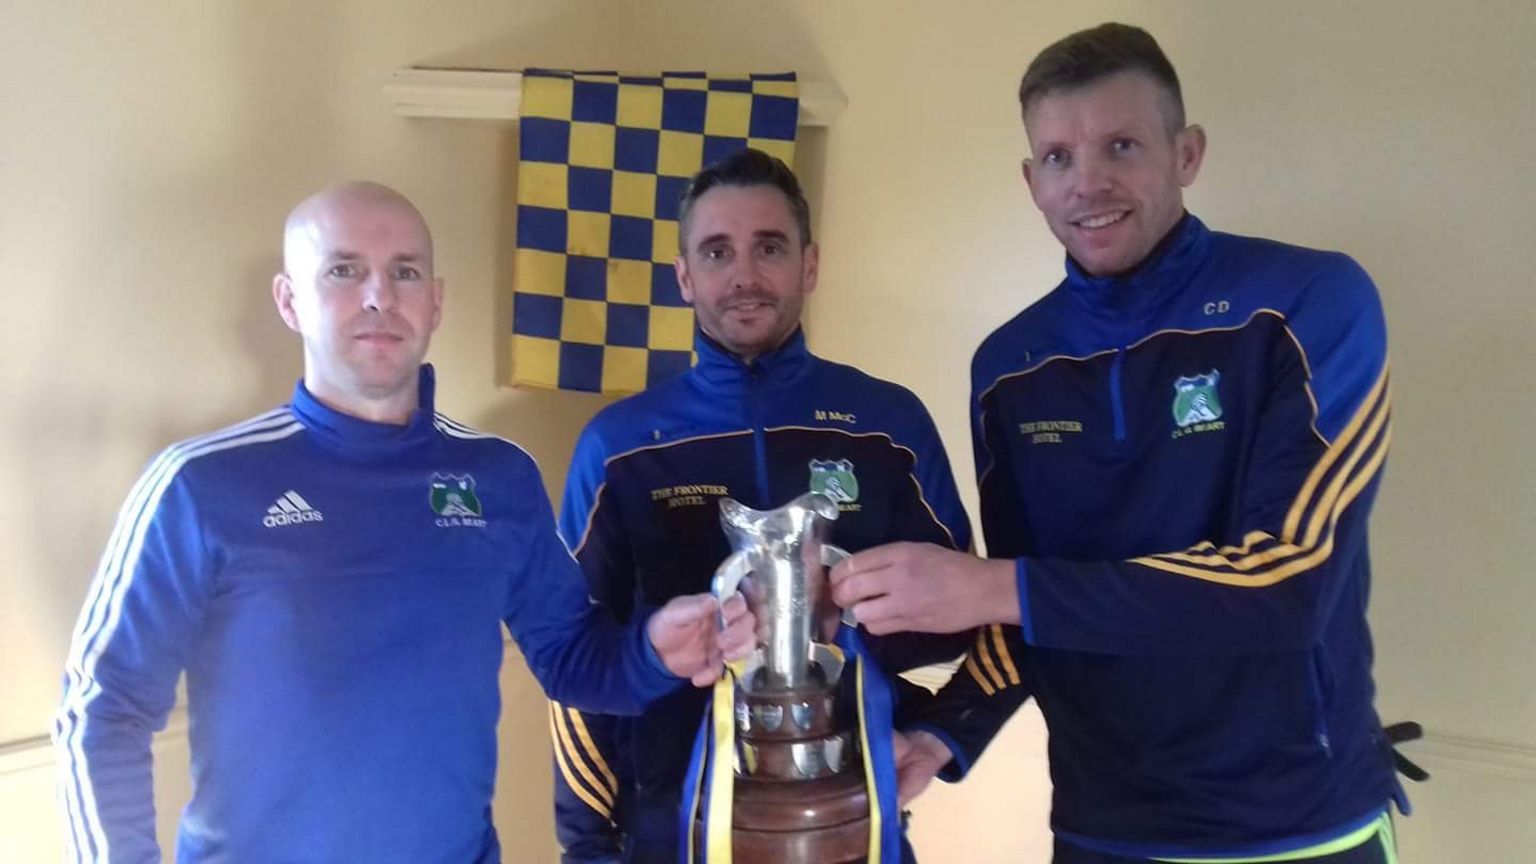 From left: Niall Campbell (38, 19 titles), Mickey McCann (40, 20 titles) and Ciaran Dowds (41, 20 titles)